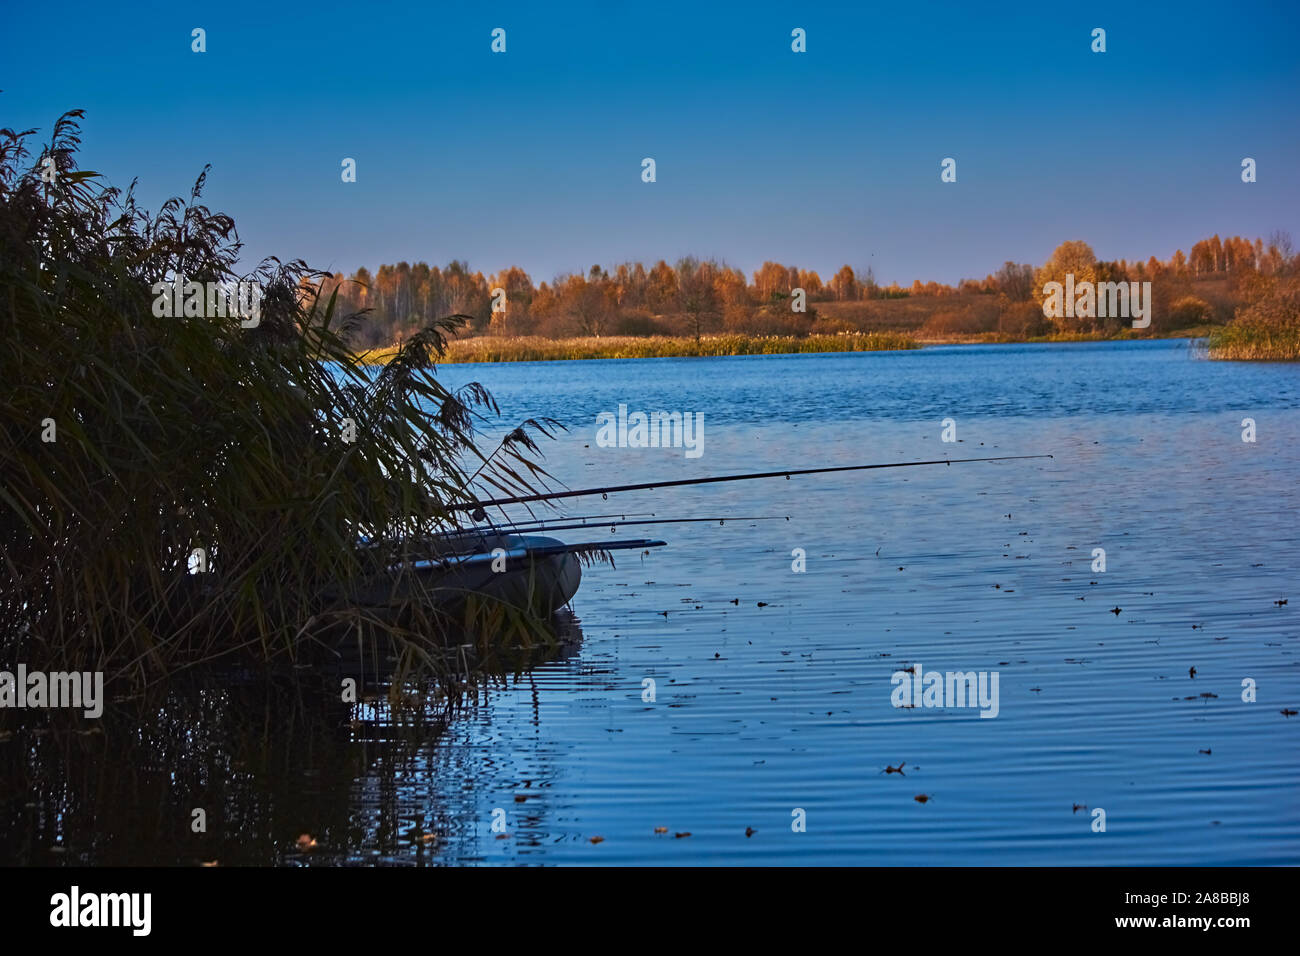 Fisherman on a boat in the autumn on a lake in the reeds Stock Photo